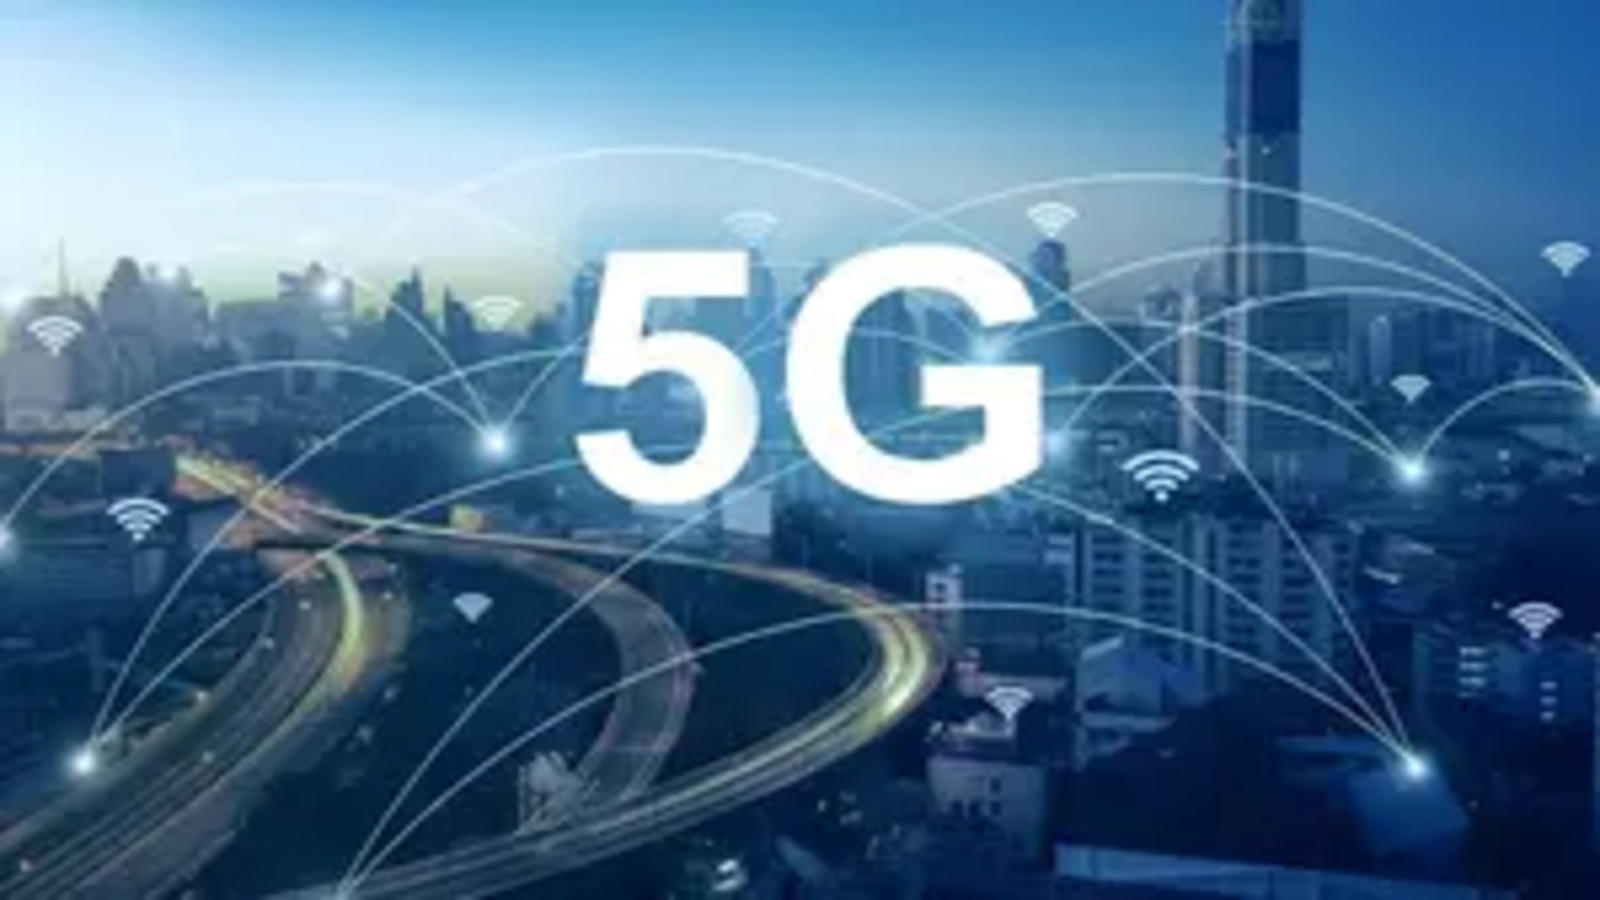 5g data consumption 4 times faster than 4g in india report